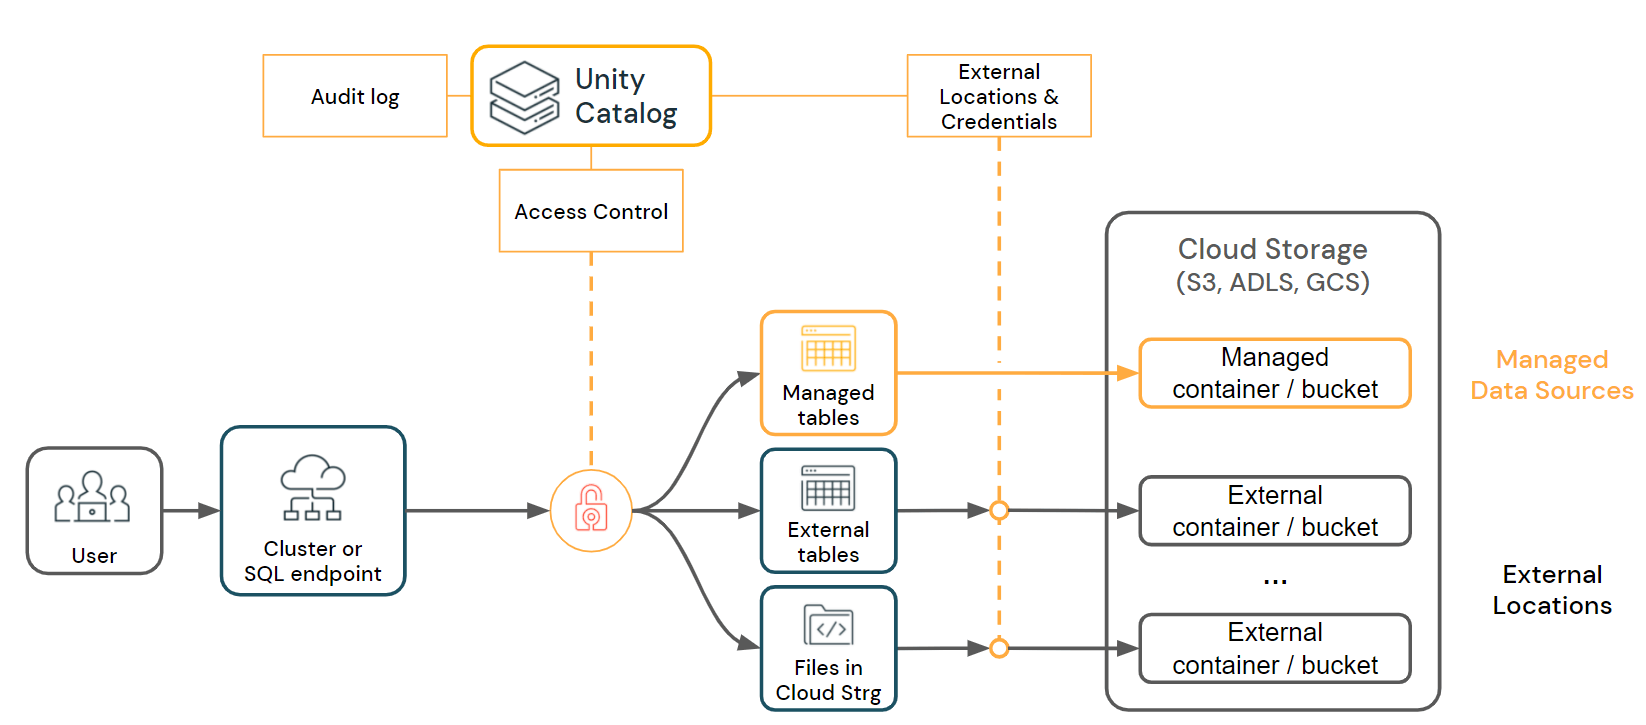  Unity Catalog enables fine-grained access control for managed tables, external tables and files